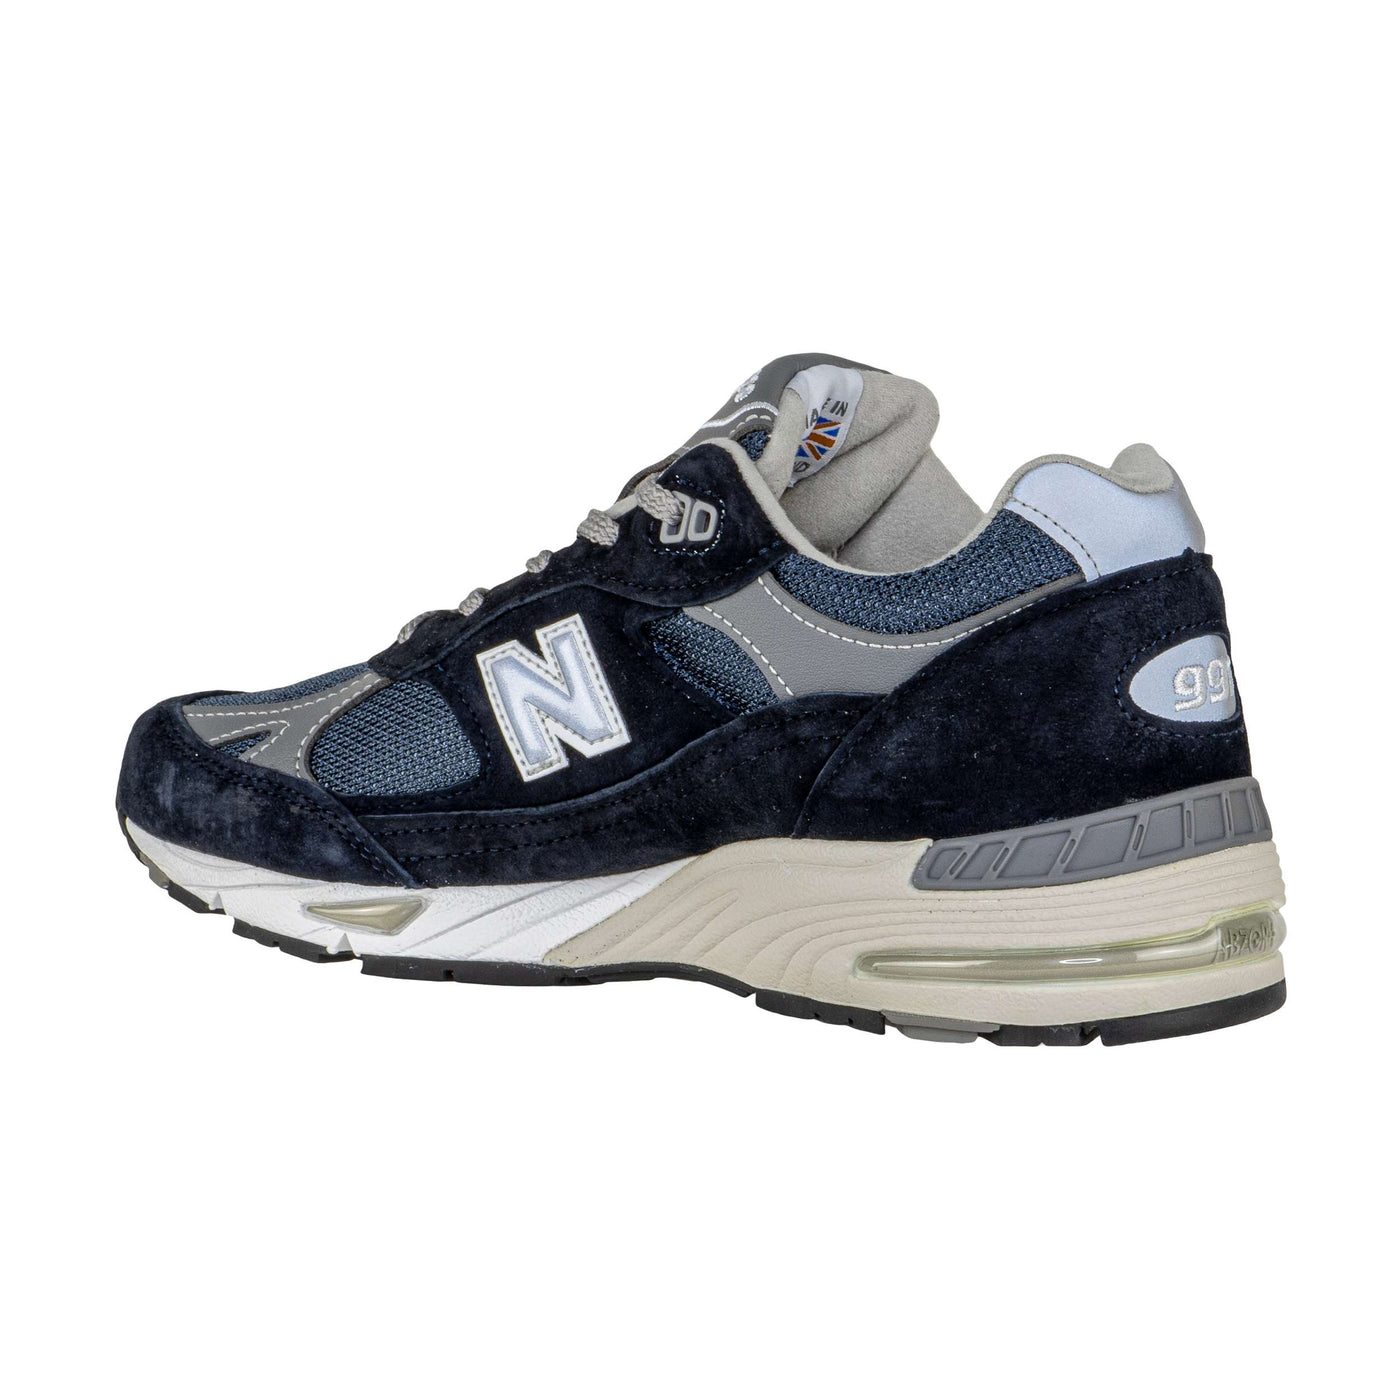 NEW BALANCE M991NV MADE IN ENGLAND